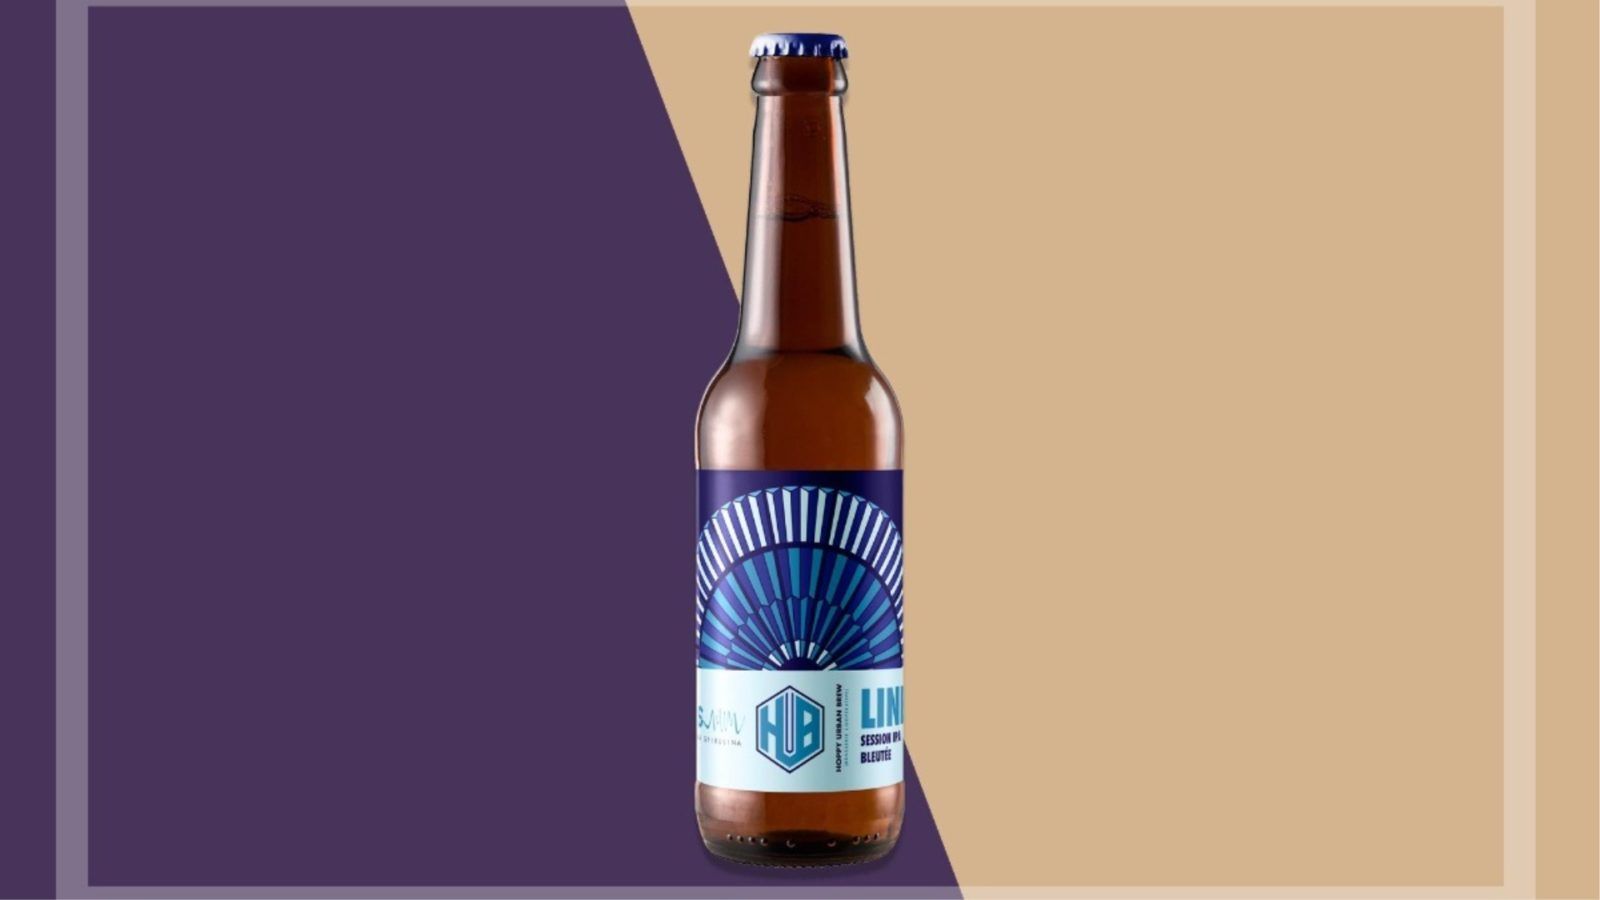 This new blue beer is already selling out in France